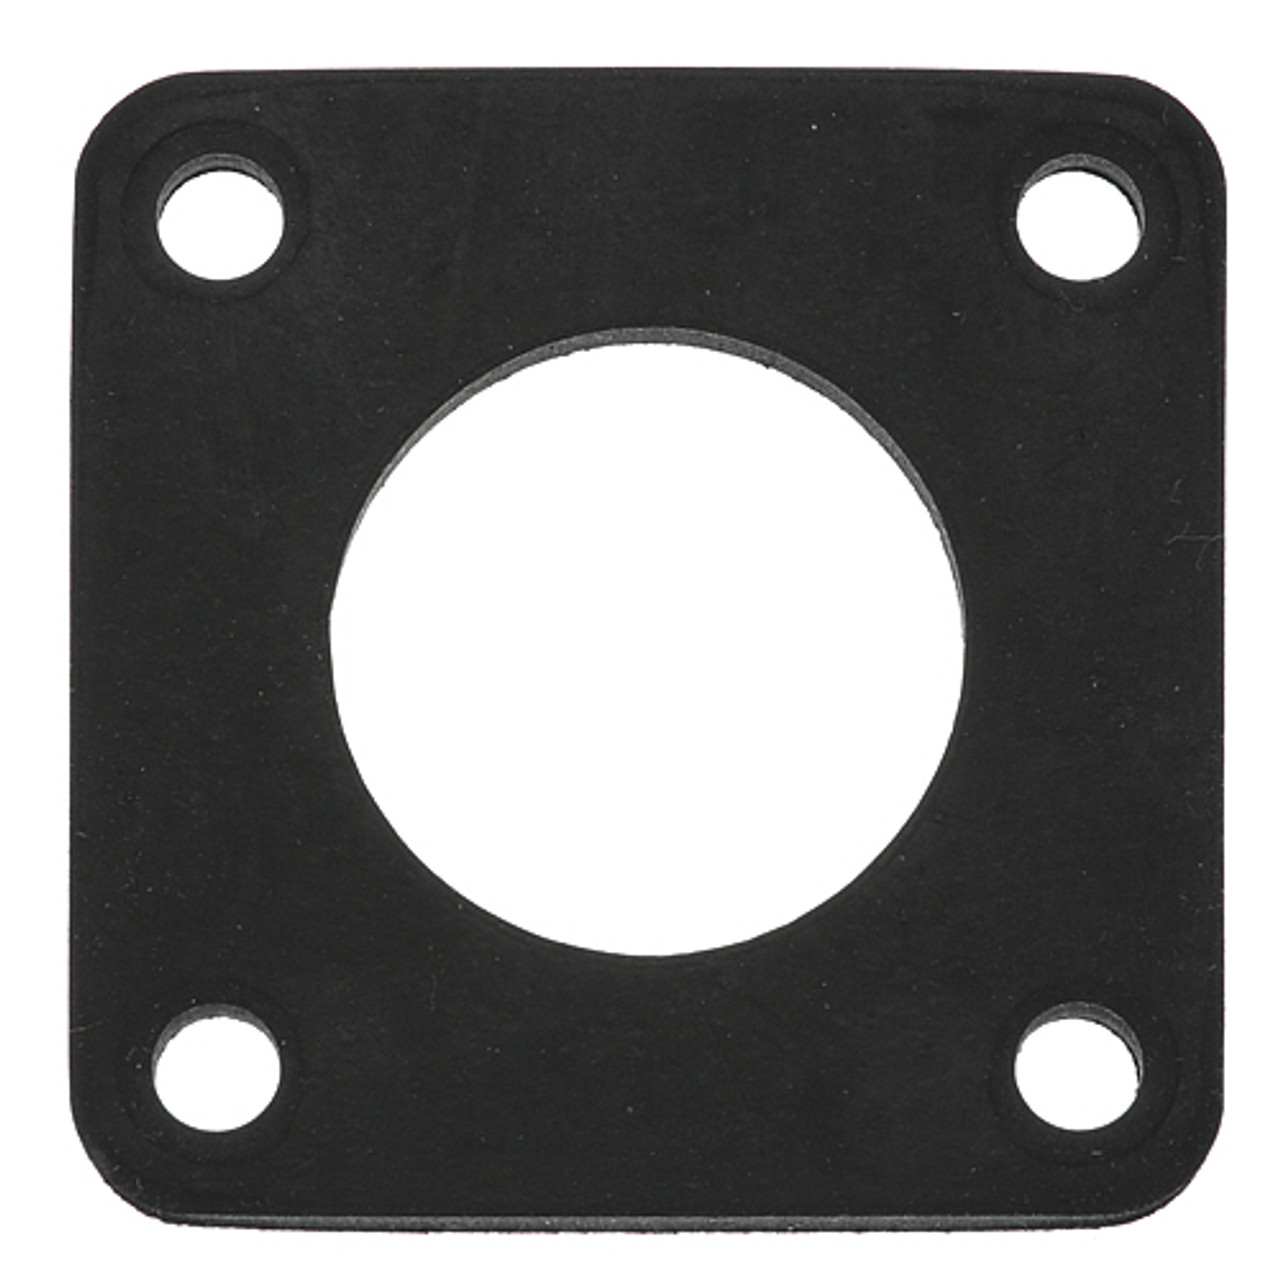 Gasket 2.5" X 2.5" - Replacement Part For Garland 78087-1